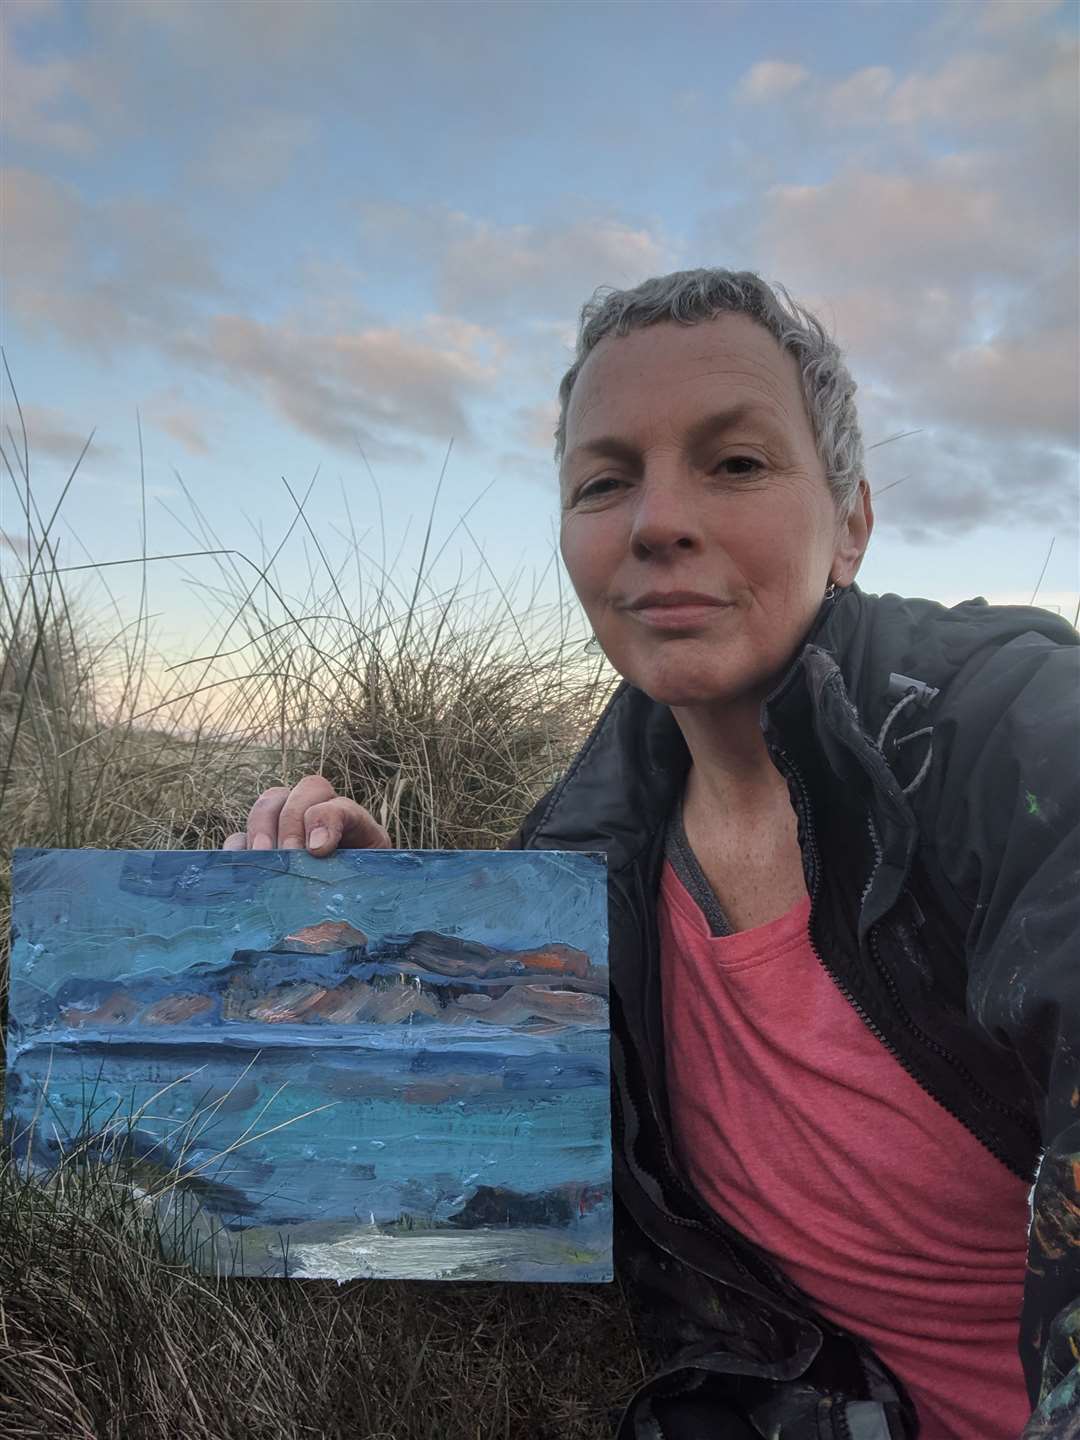 Findhorn-based painter Iona Leishman will feature.